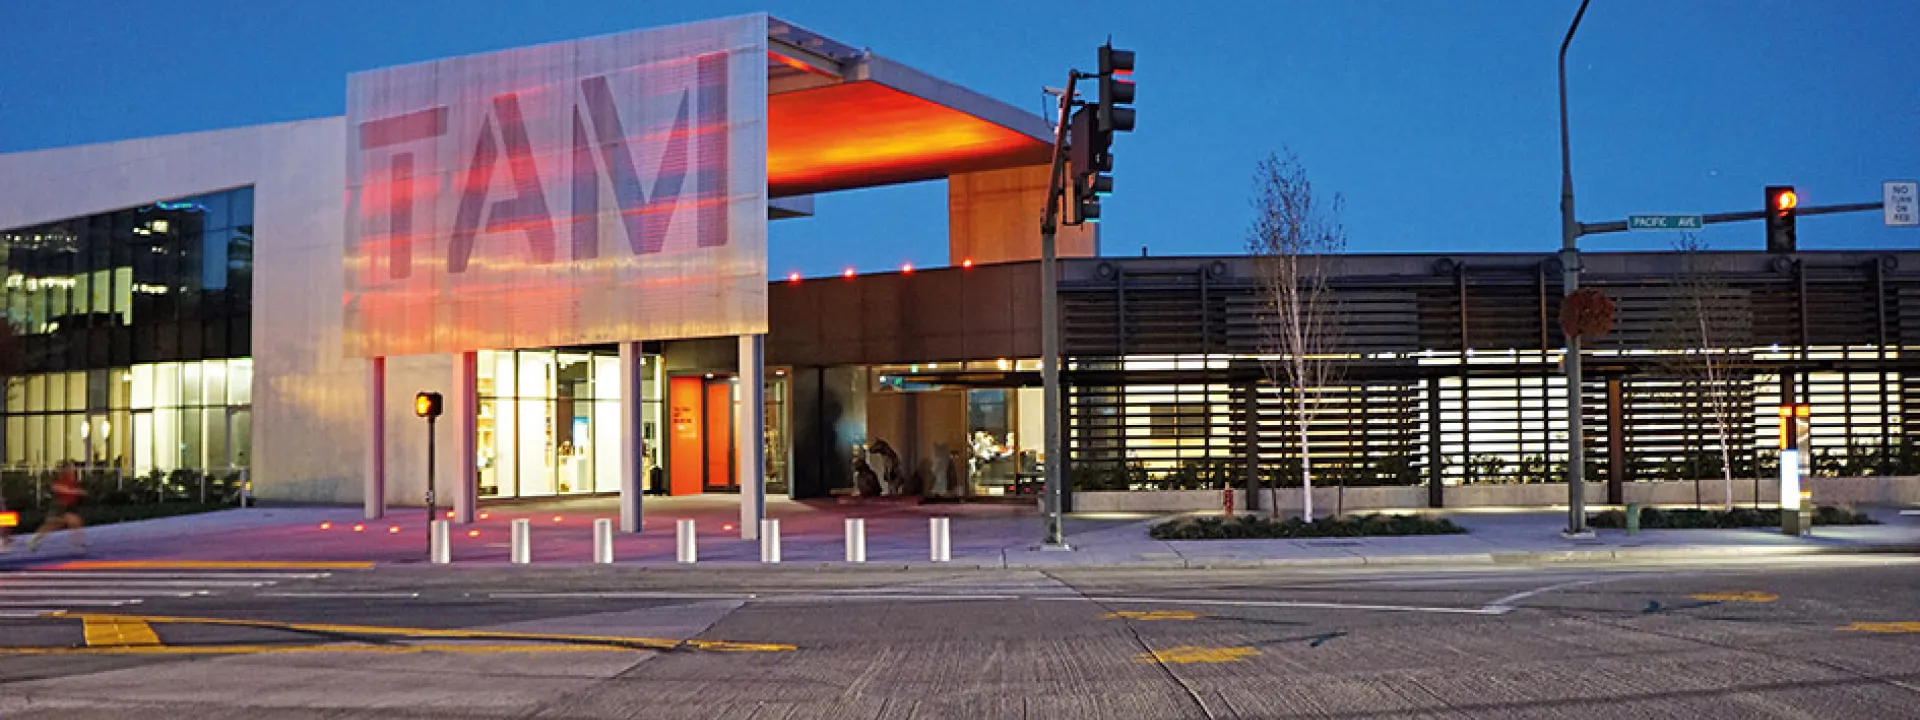 Courtesy of Tacoma Art Museum; Say “I do” to the modern TAM building in Tacoma